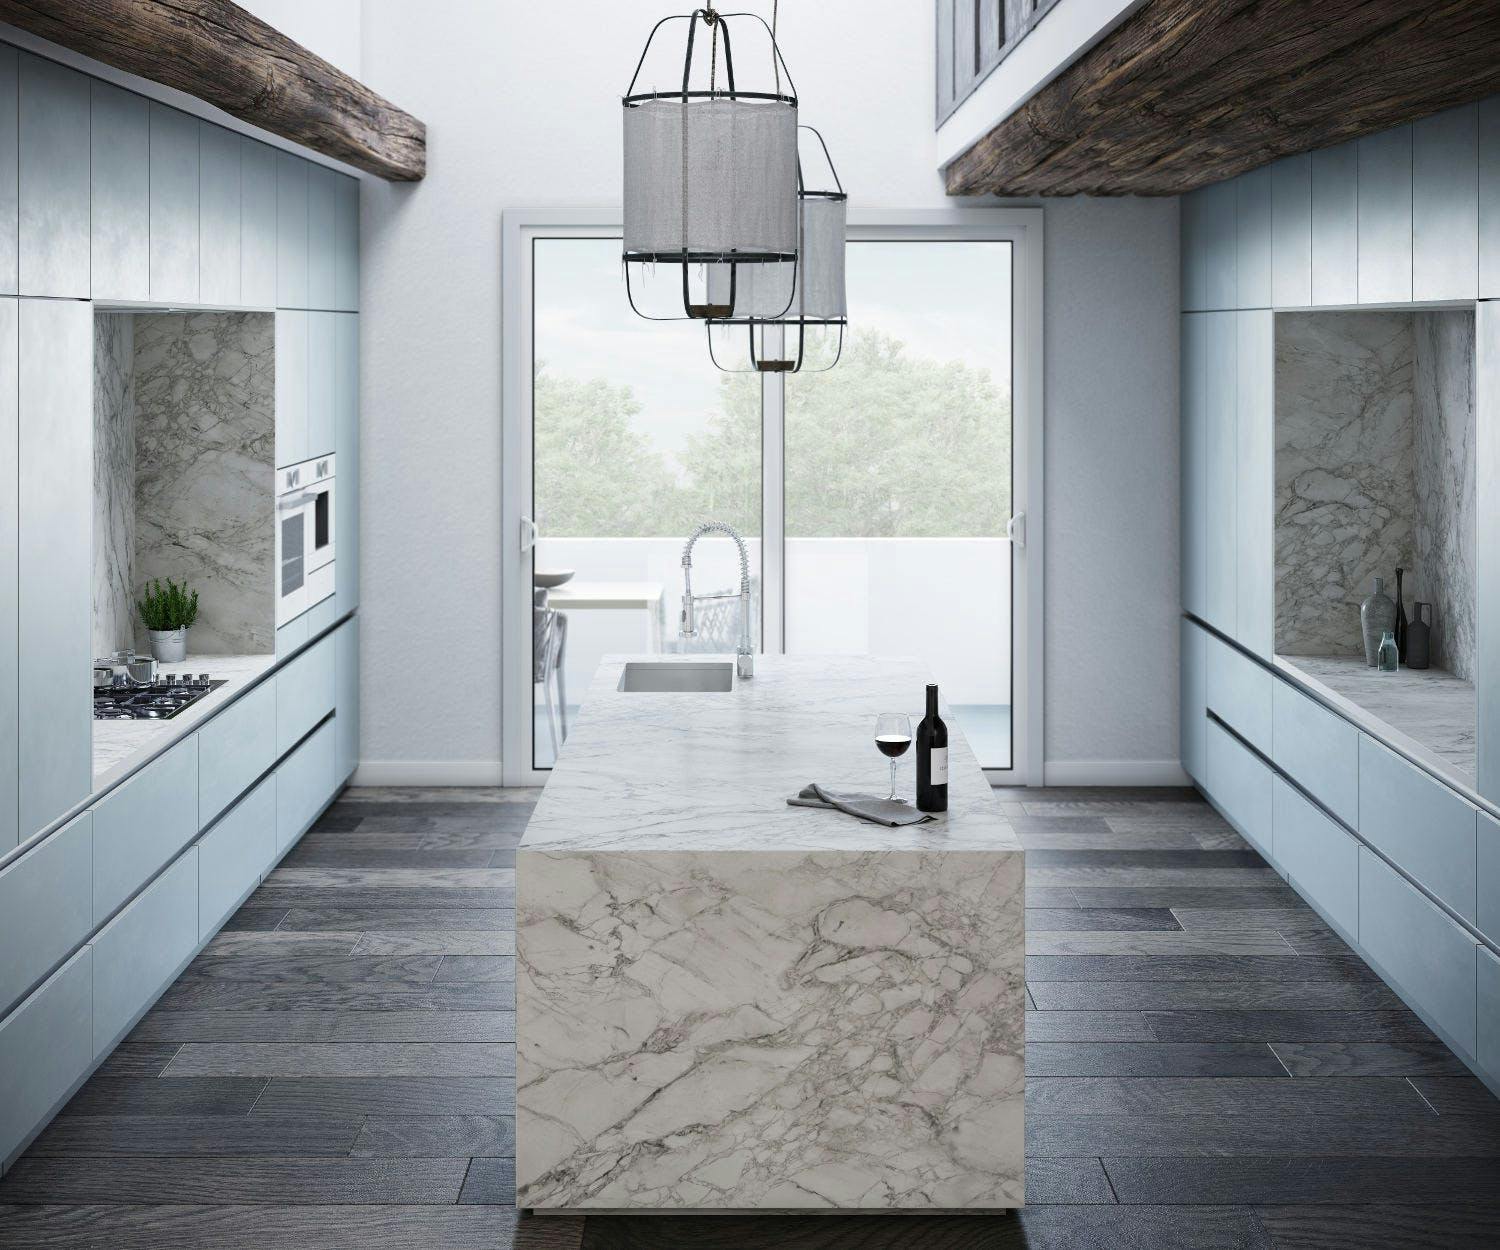 Image 39 of Dekton Kitchen Portum Velvet 1 in Compact kitchens: Who says they're a disadvantage? - Cosentino